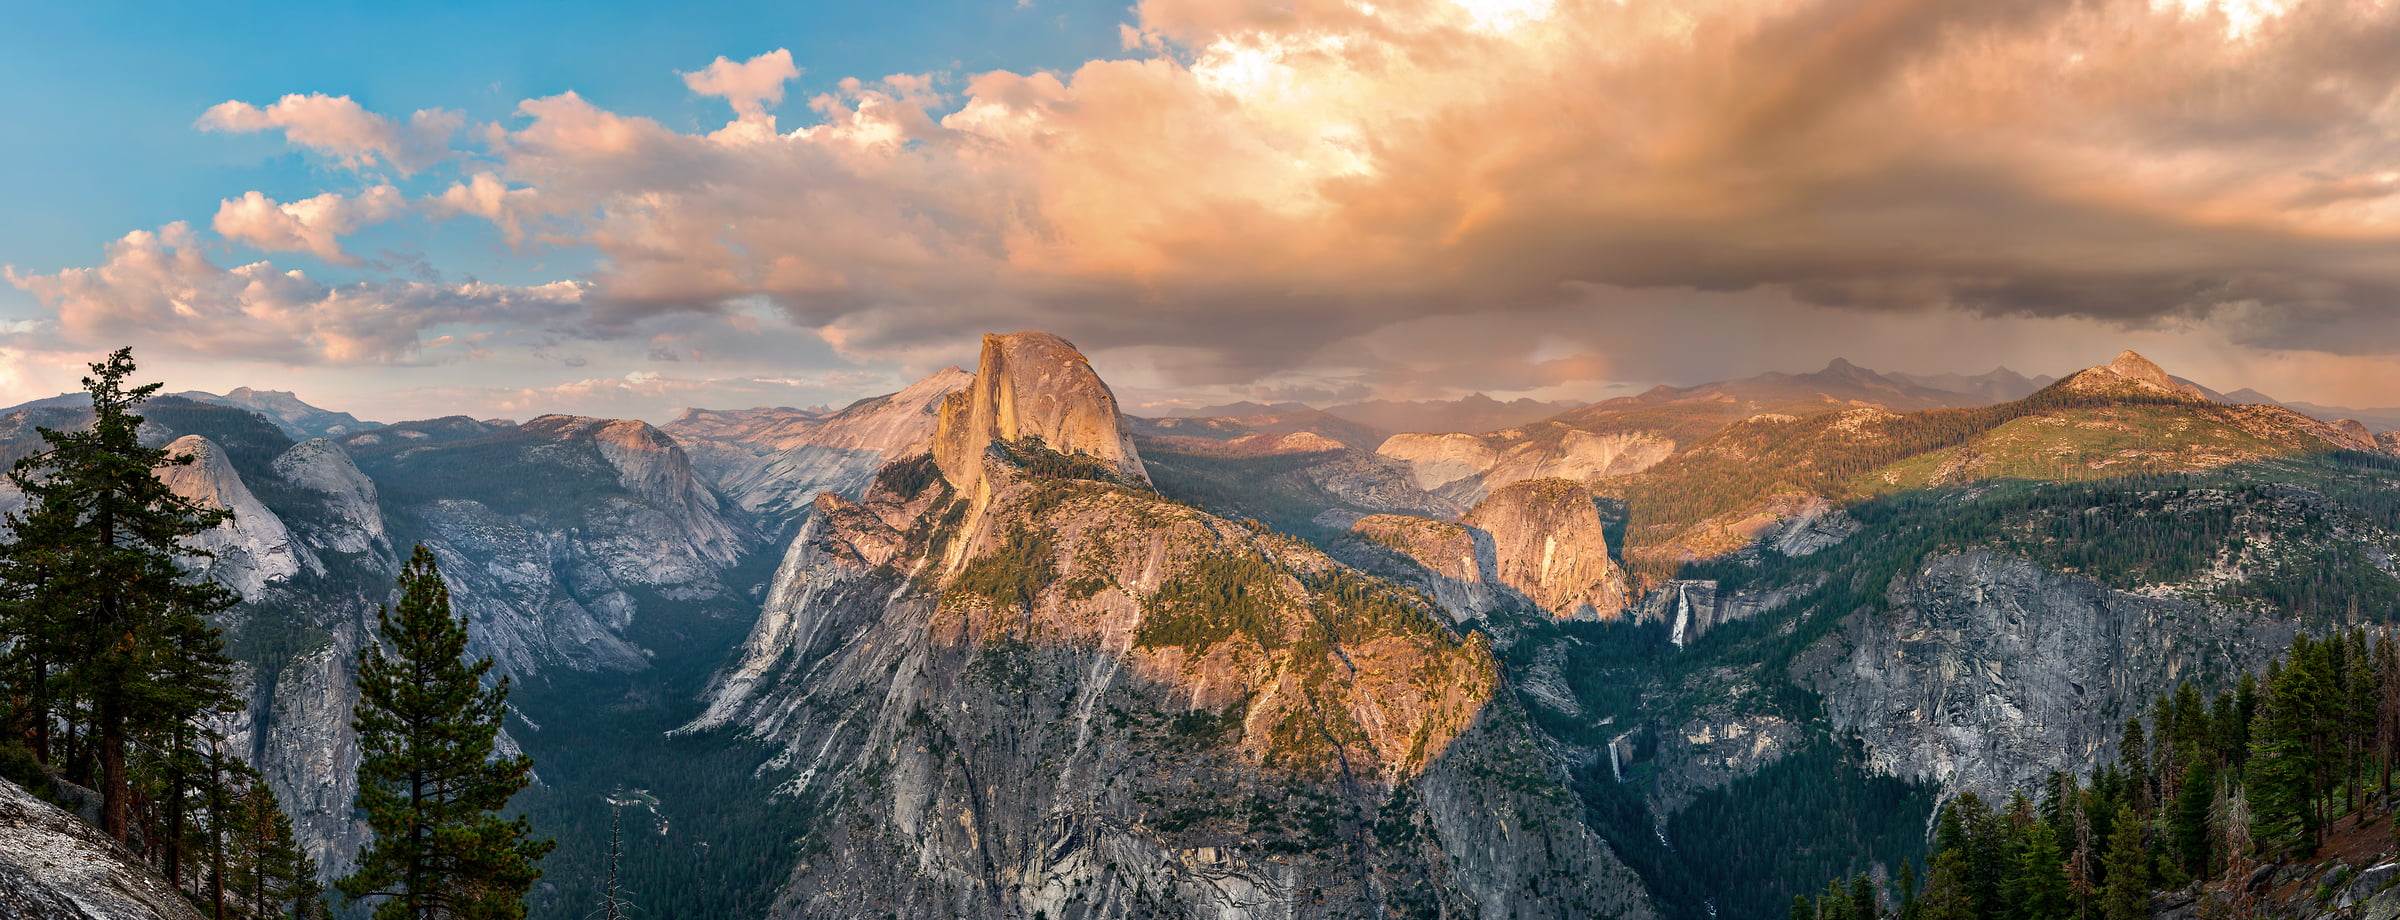 946 megapixels! A very high resolution, large-format VAST photo print of the Yosemite Naitonal Park valley and Half Dome at sunset from Glacier Point; nature landscape photo created by Justin Katz.